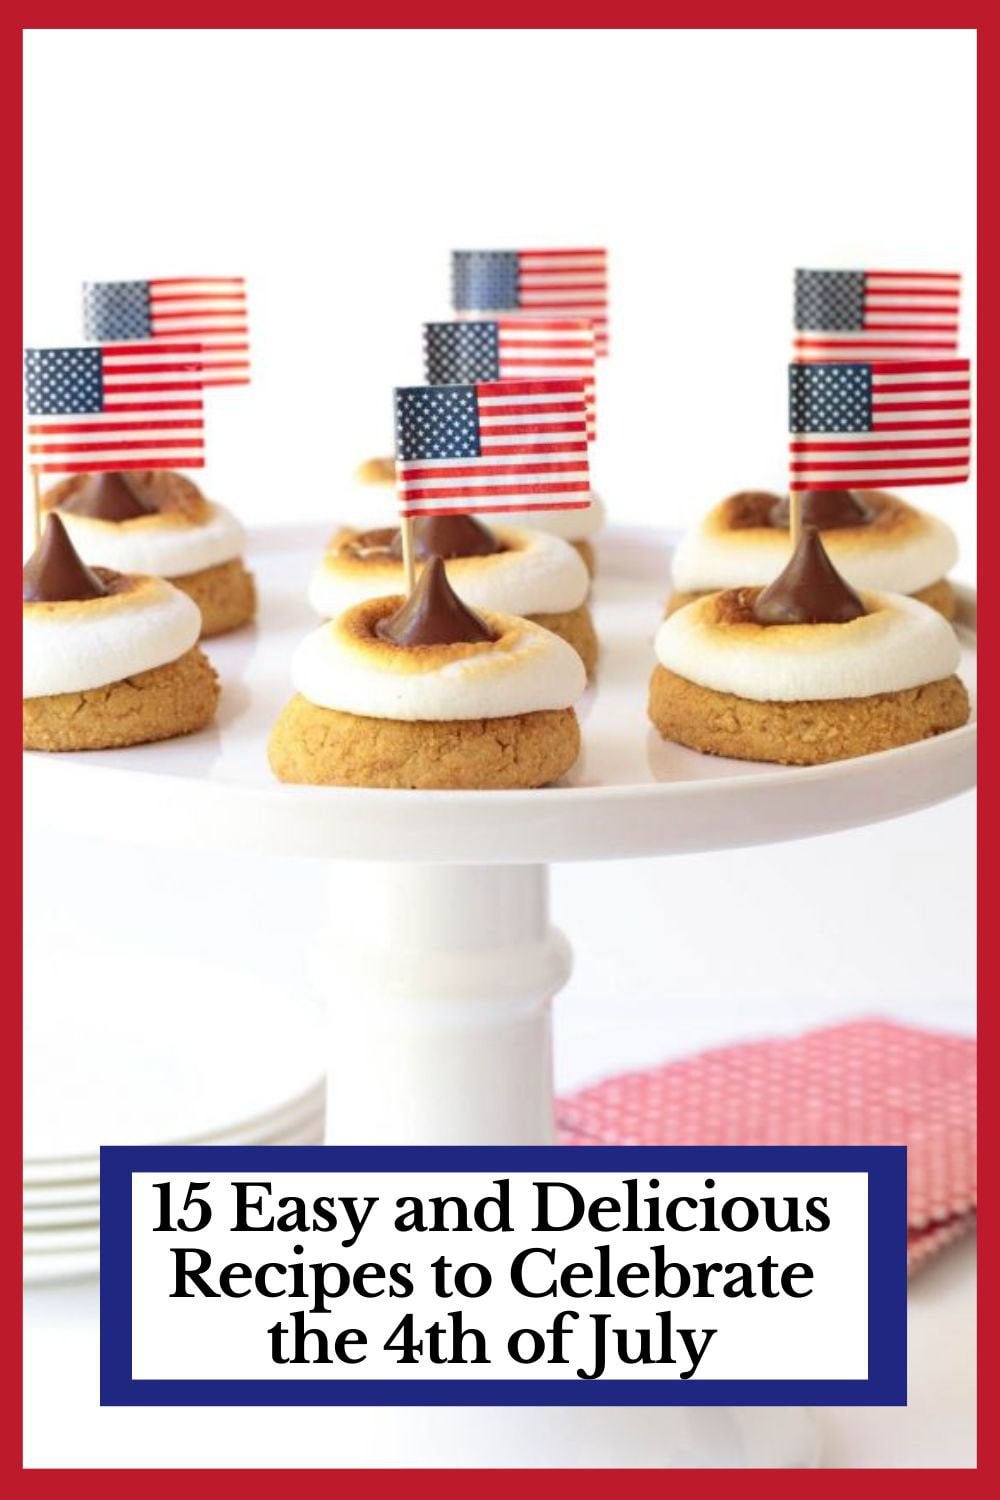 15 Fun, Festive Recipes for a Delicious Fourth of July